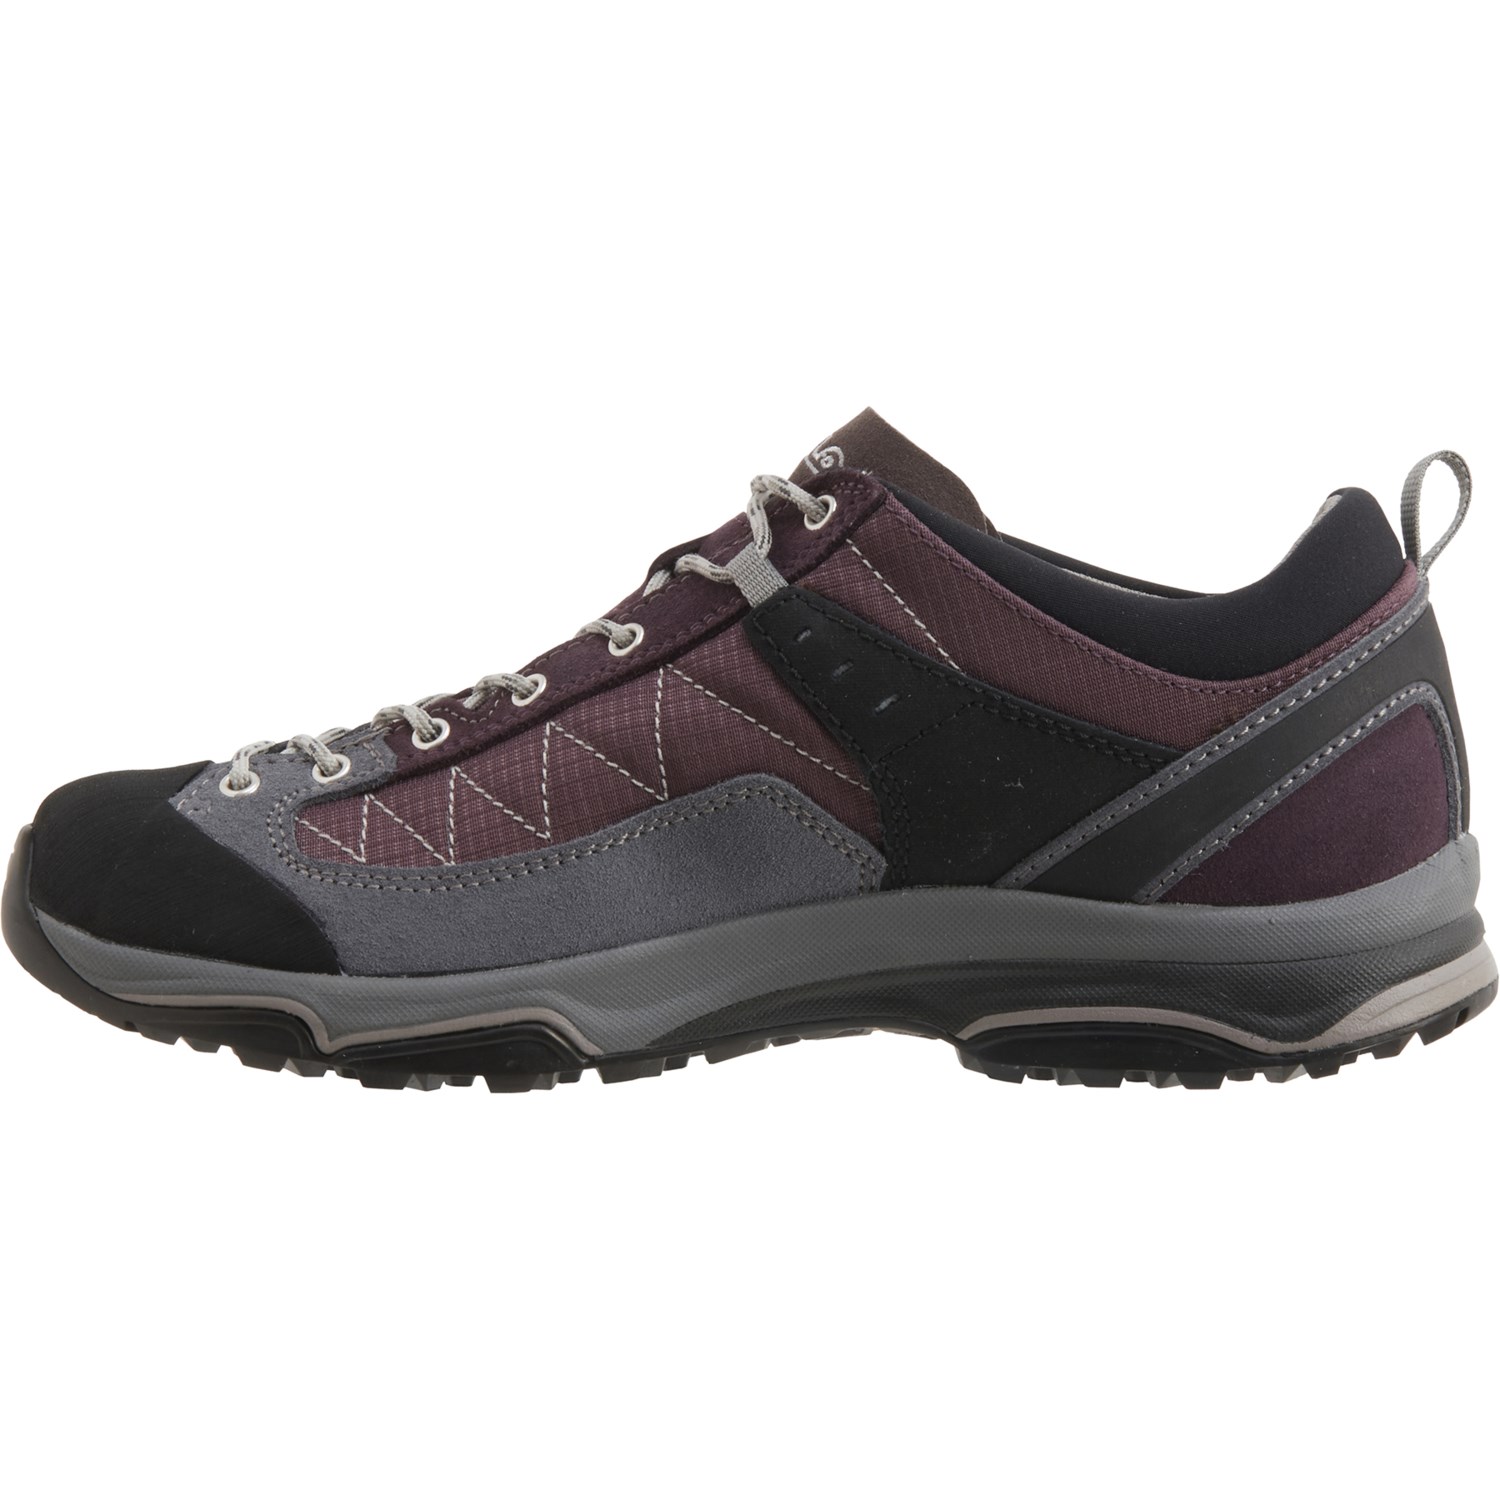 Details about   Asolo Made in Europe Pipe GV ML Women GTX Gore-Tex® Hiking Shoe Sneaker Size 8.5 